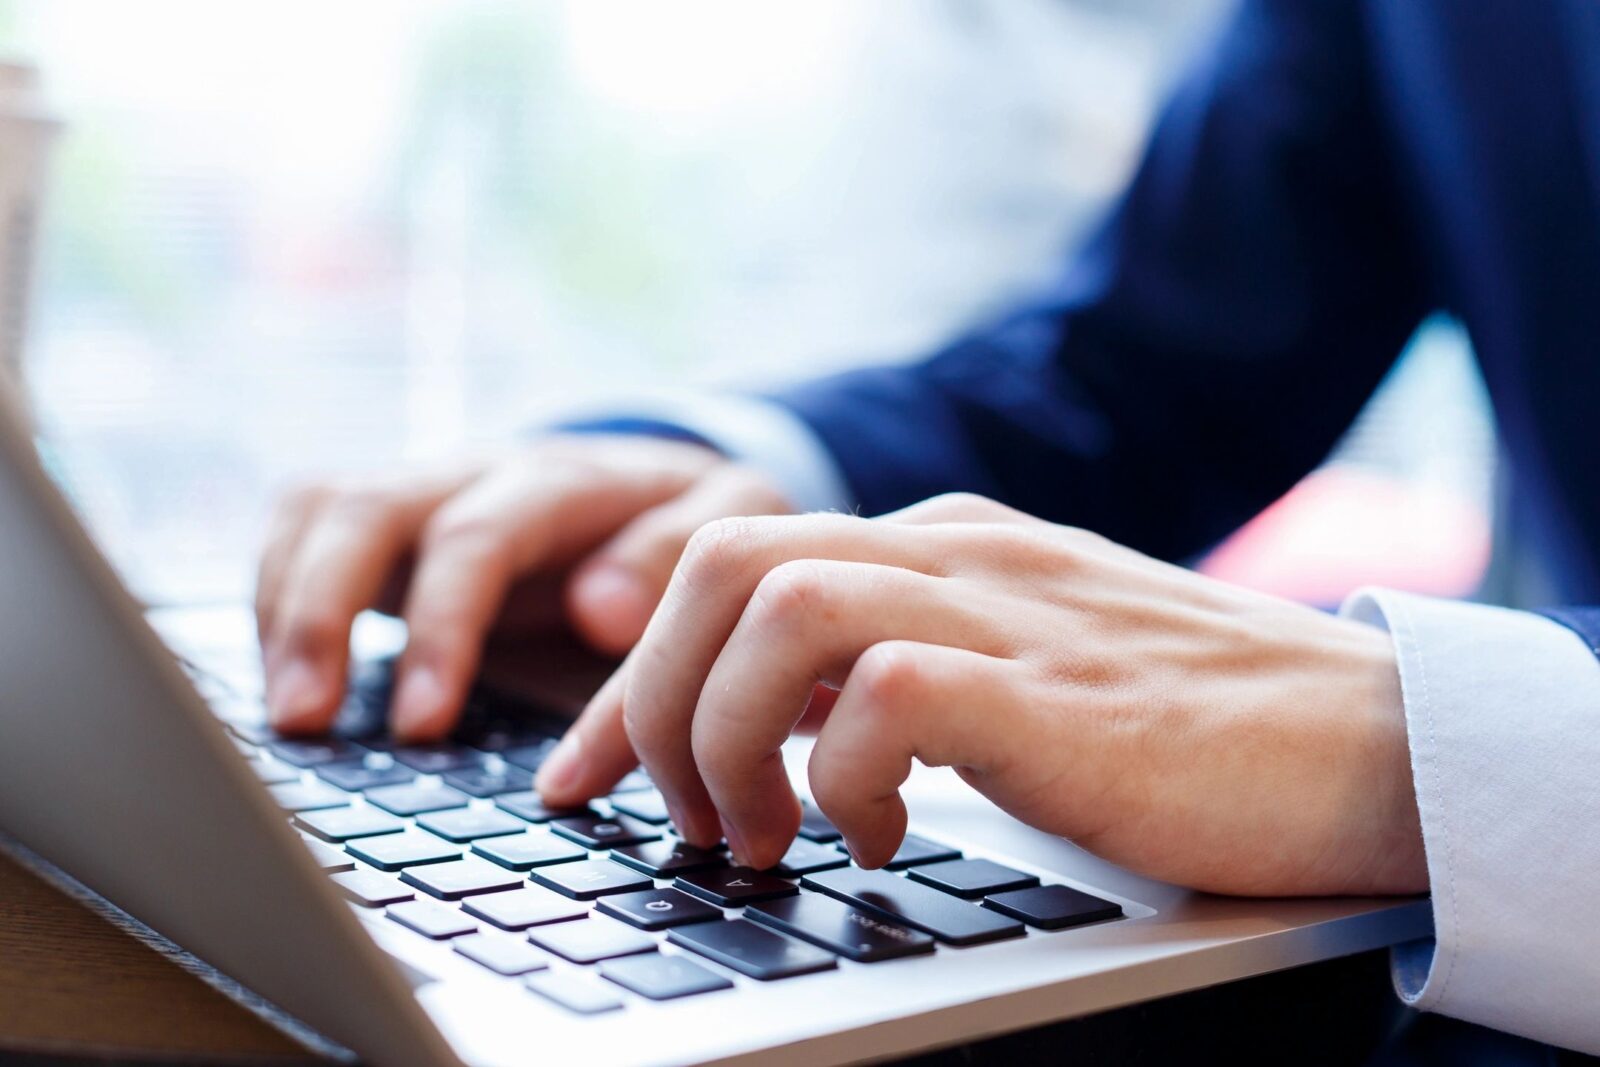 Stock image photo of white hands typing on a laptop keyboard